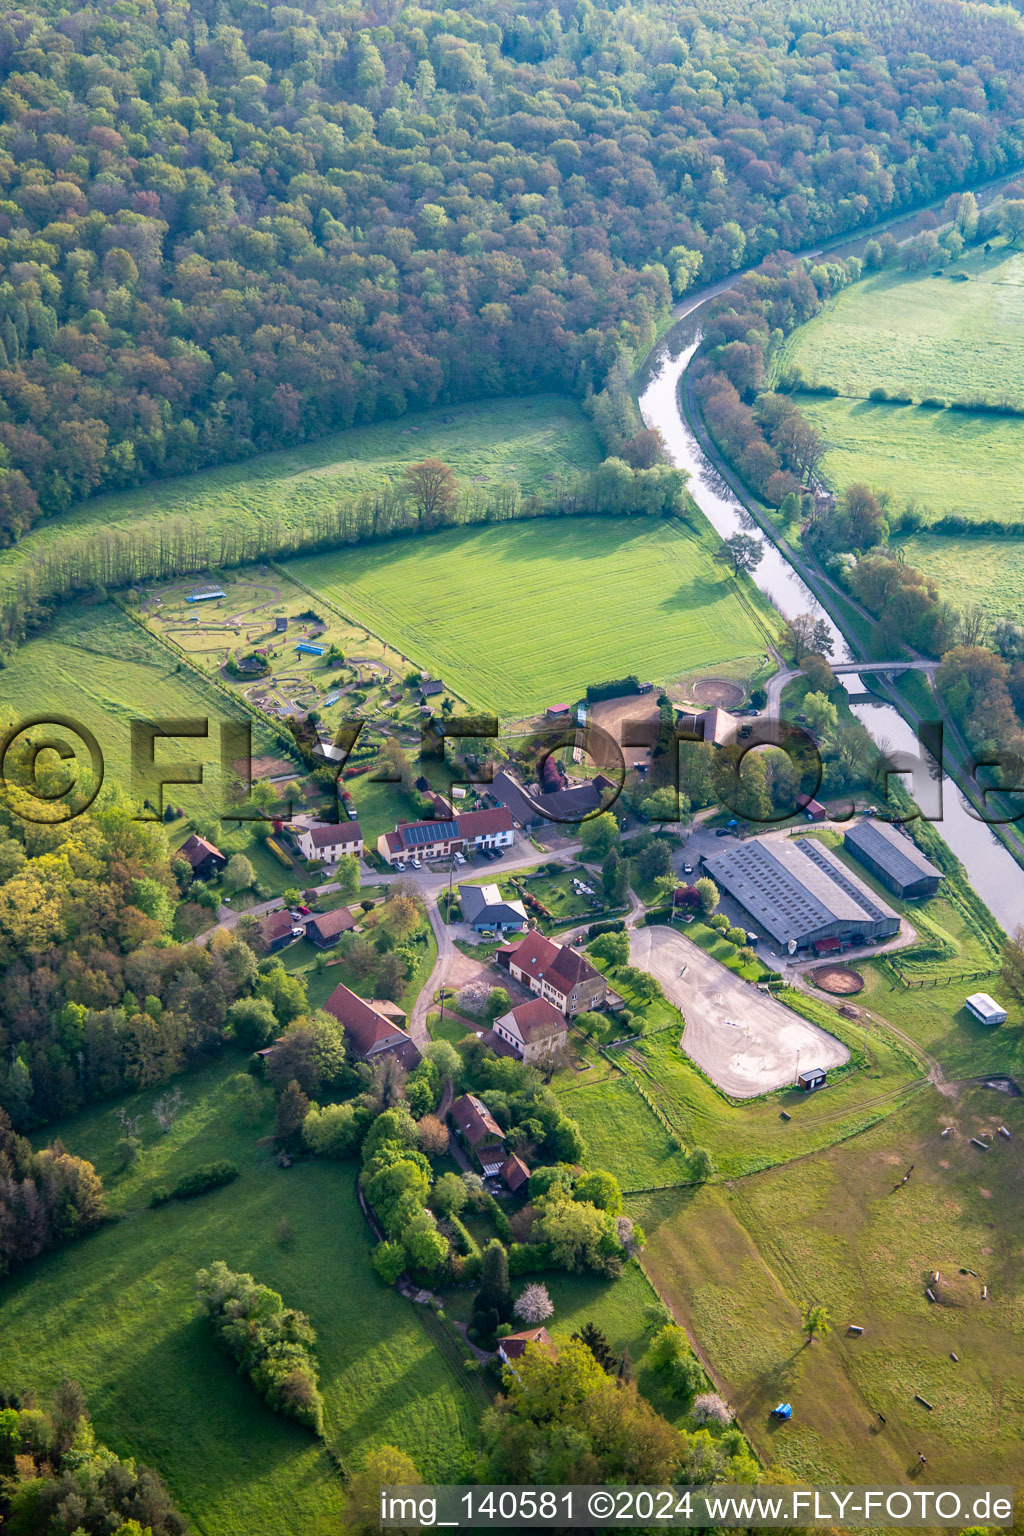 Aerial photograpy of Parc Nature de Cheval in Neuweyerhof in Altwiller in the state Bas-Rhin, France